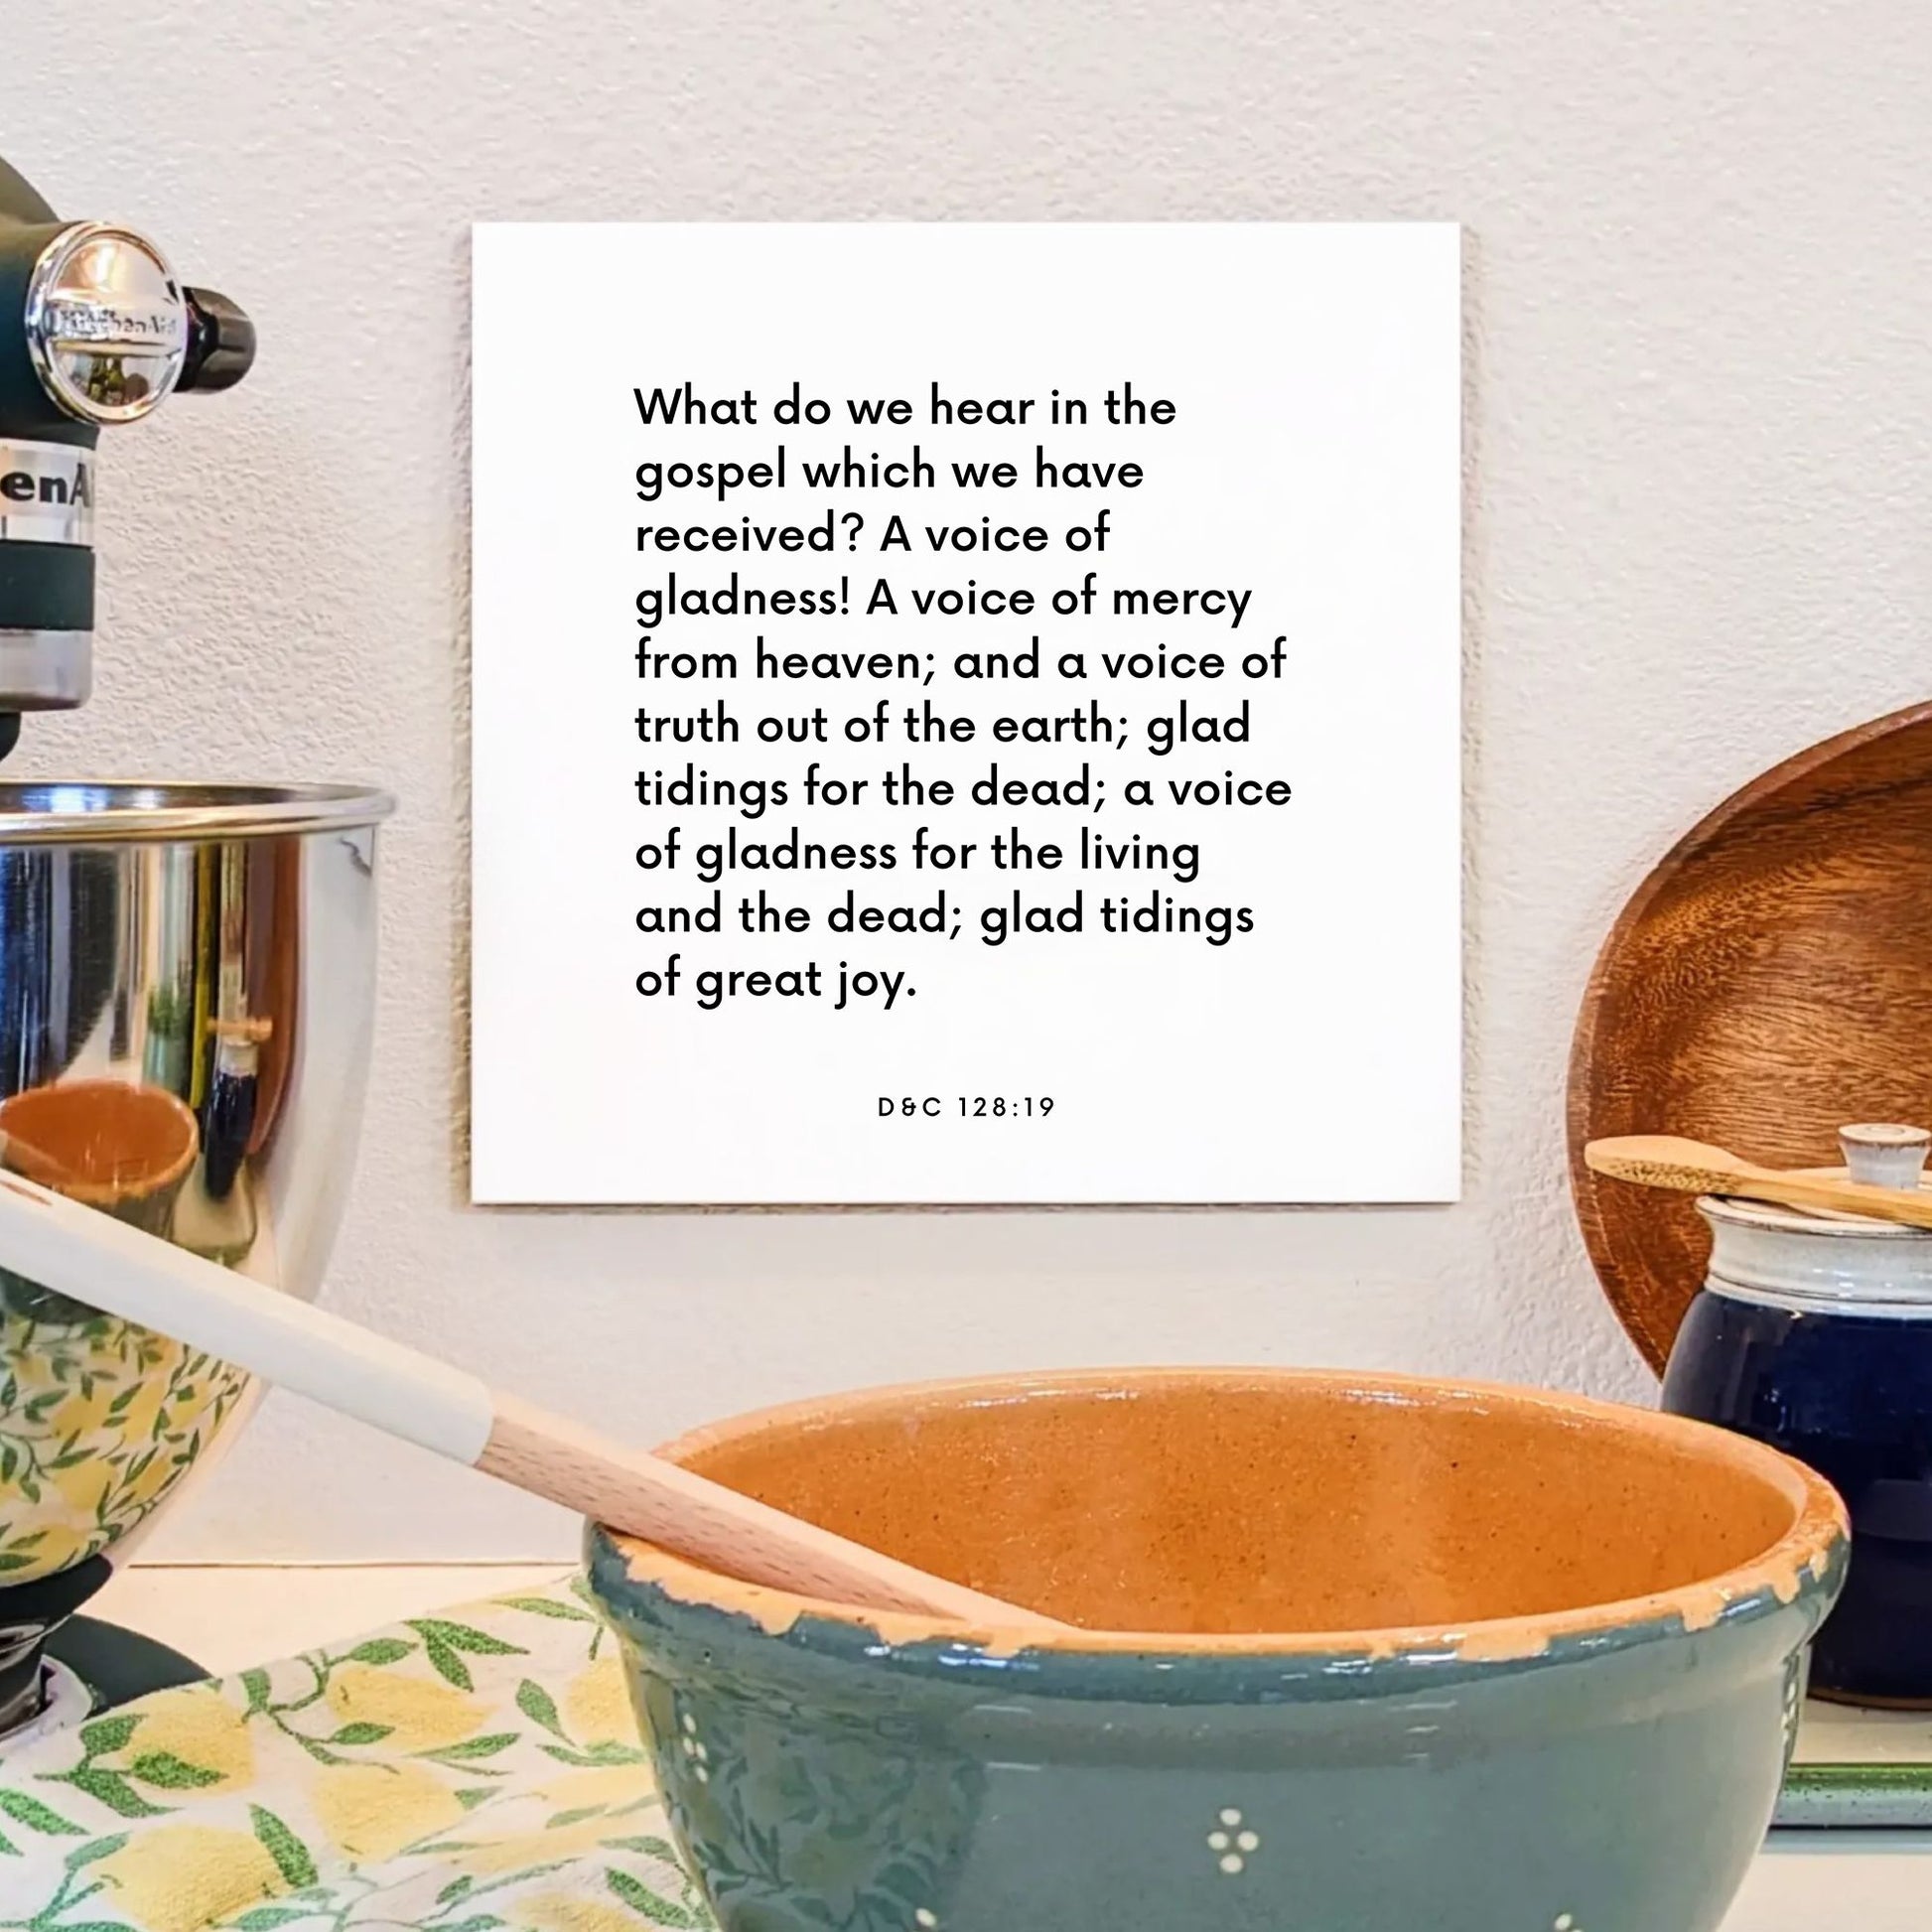 Kitchen mouting of the scripture tile for D&C 128:19 - "What do we hear in the gospel which we have received?"